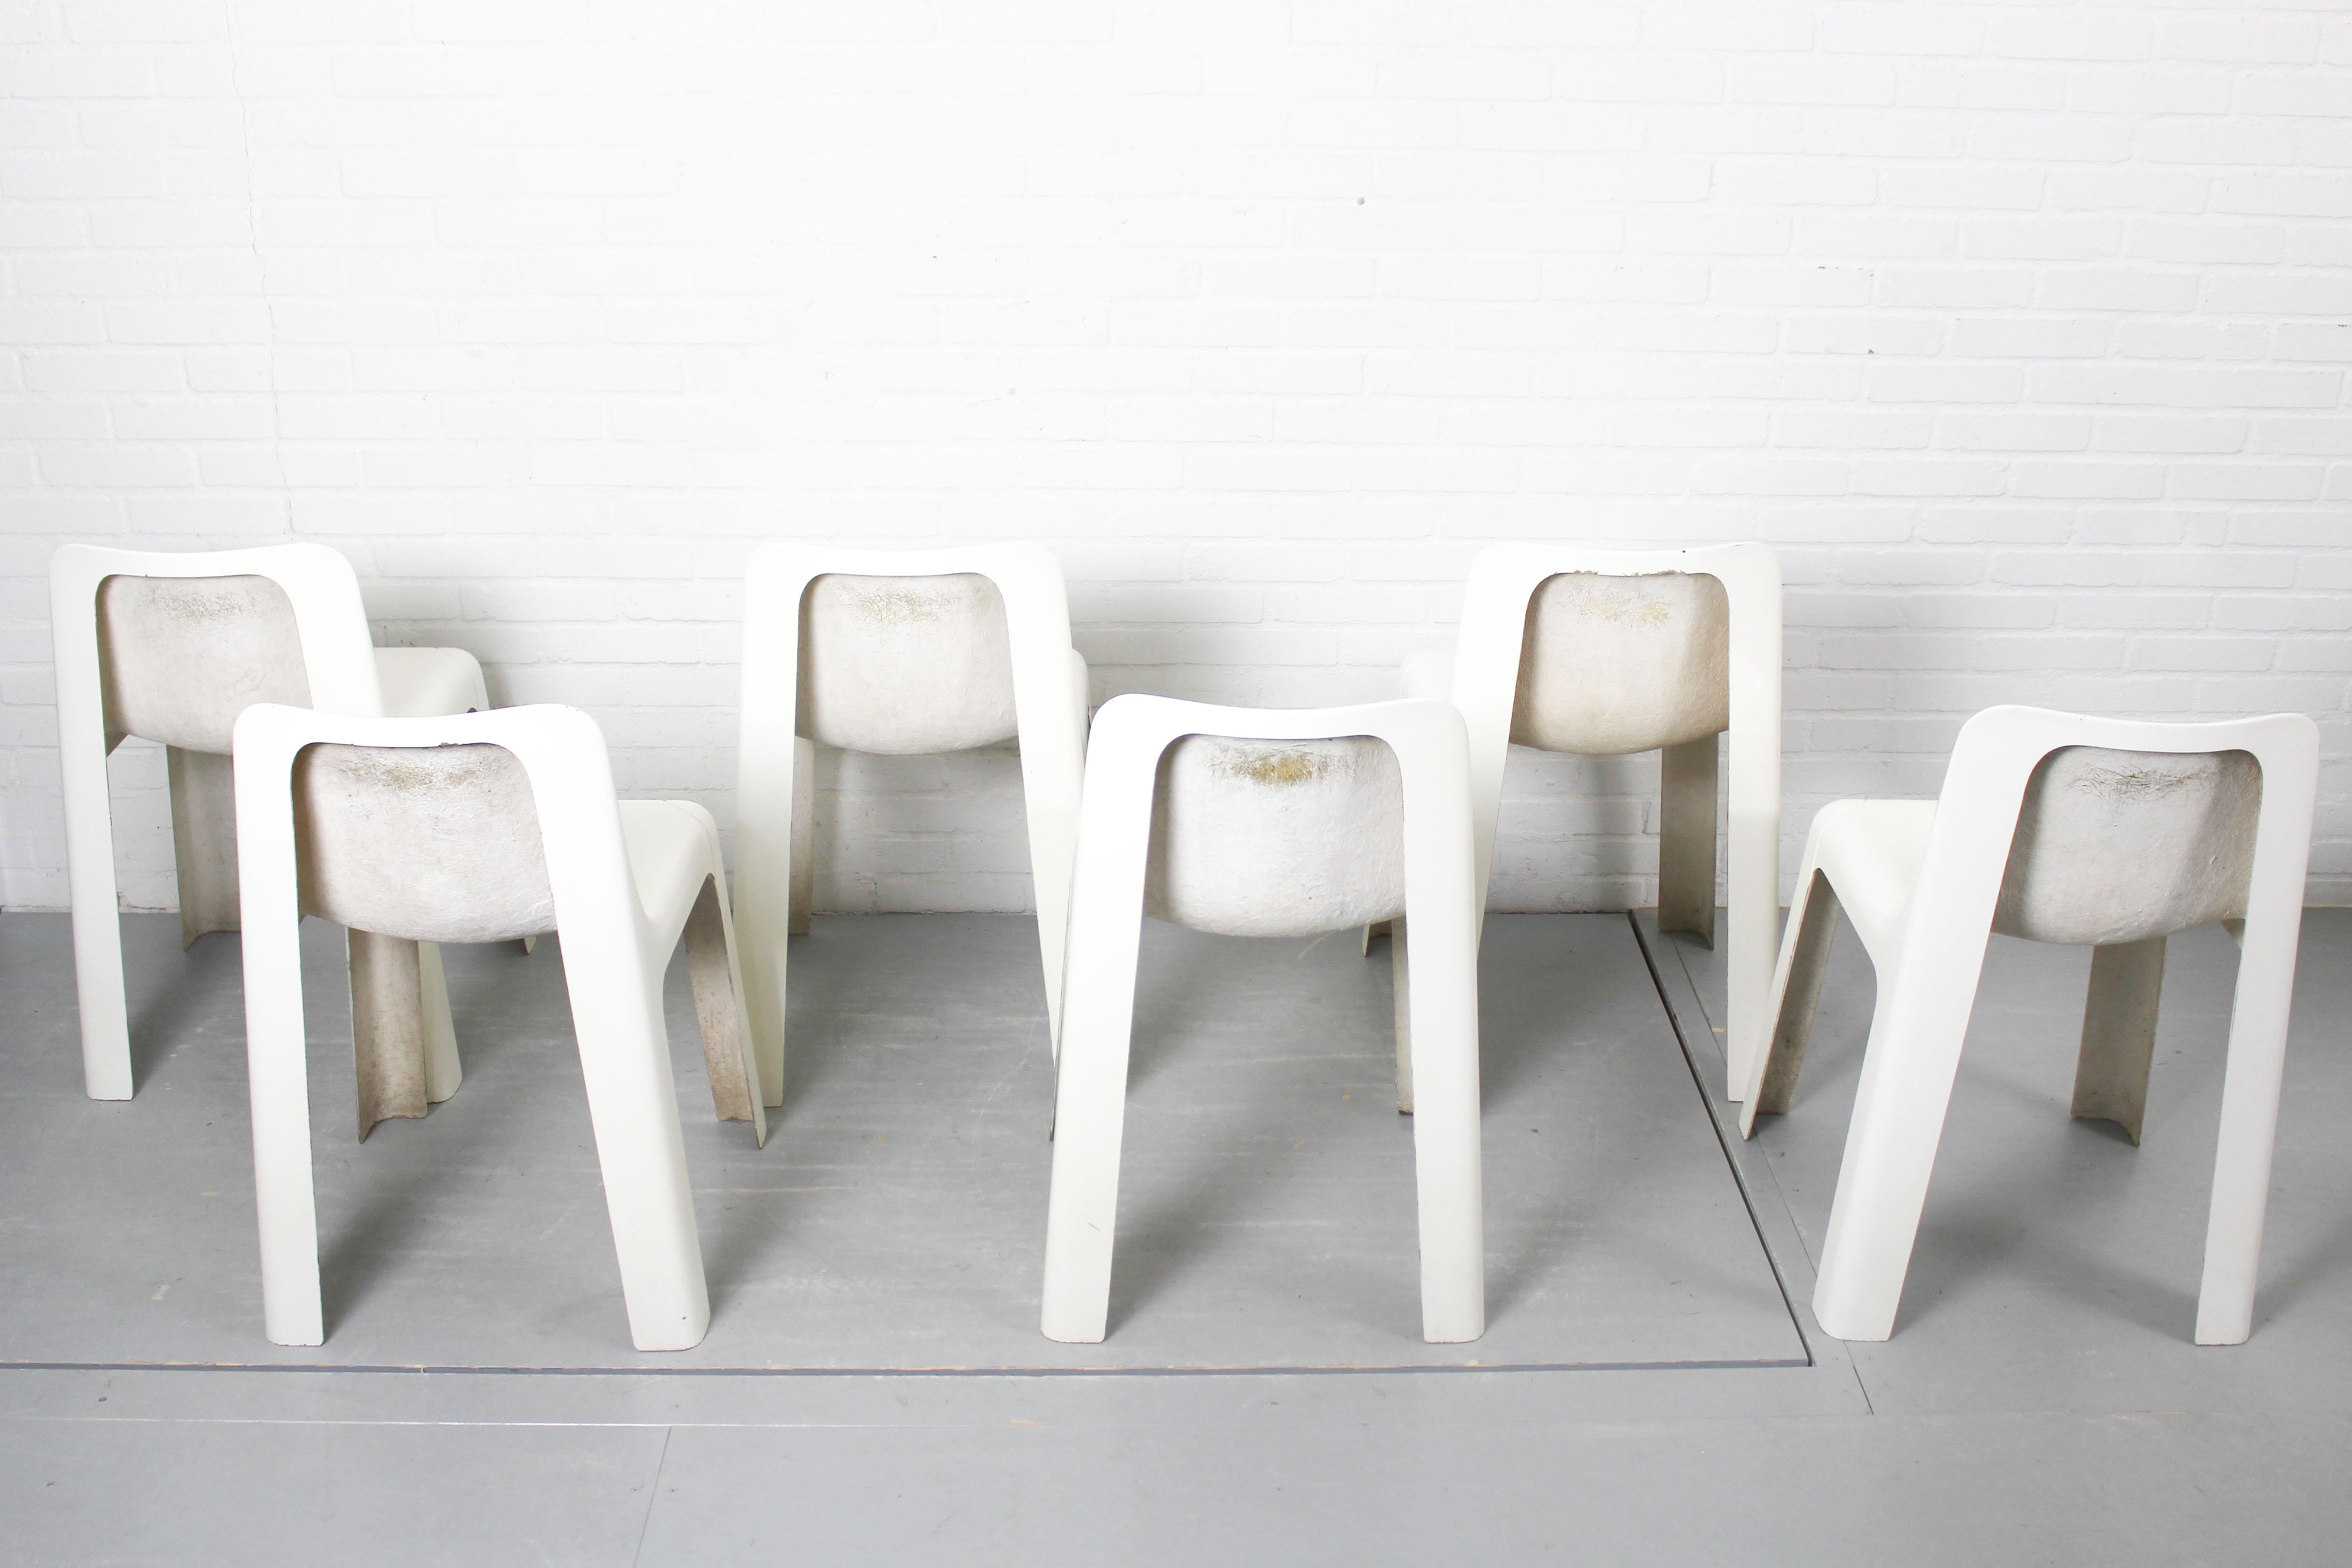 6 OZOO 700 Fiberglass Dining Chairs by Marc Berthier for Roche Bobois, 1970s For Sale 3